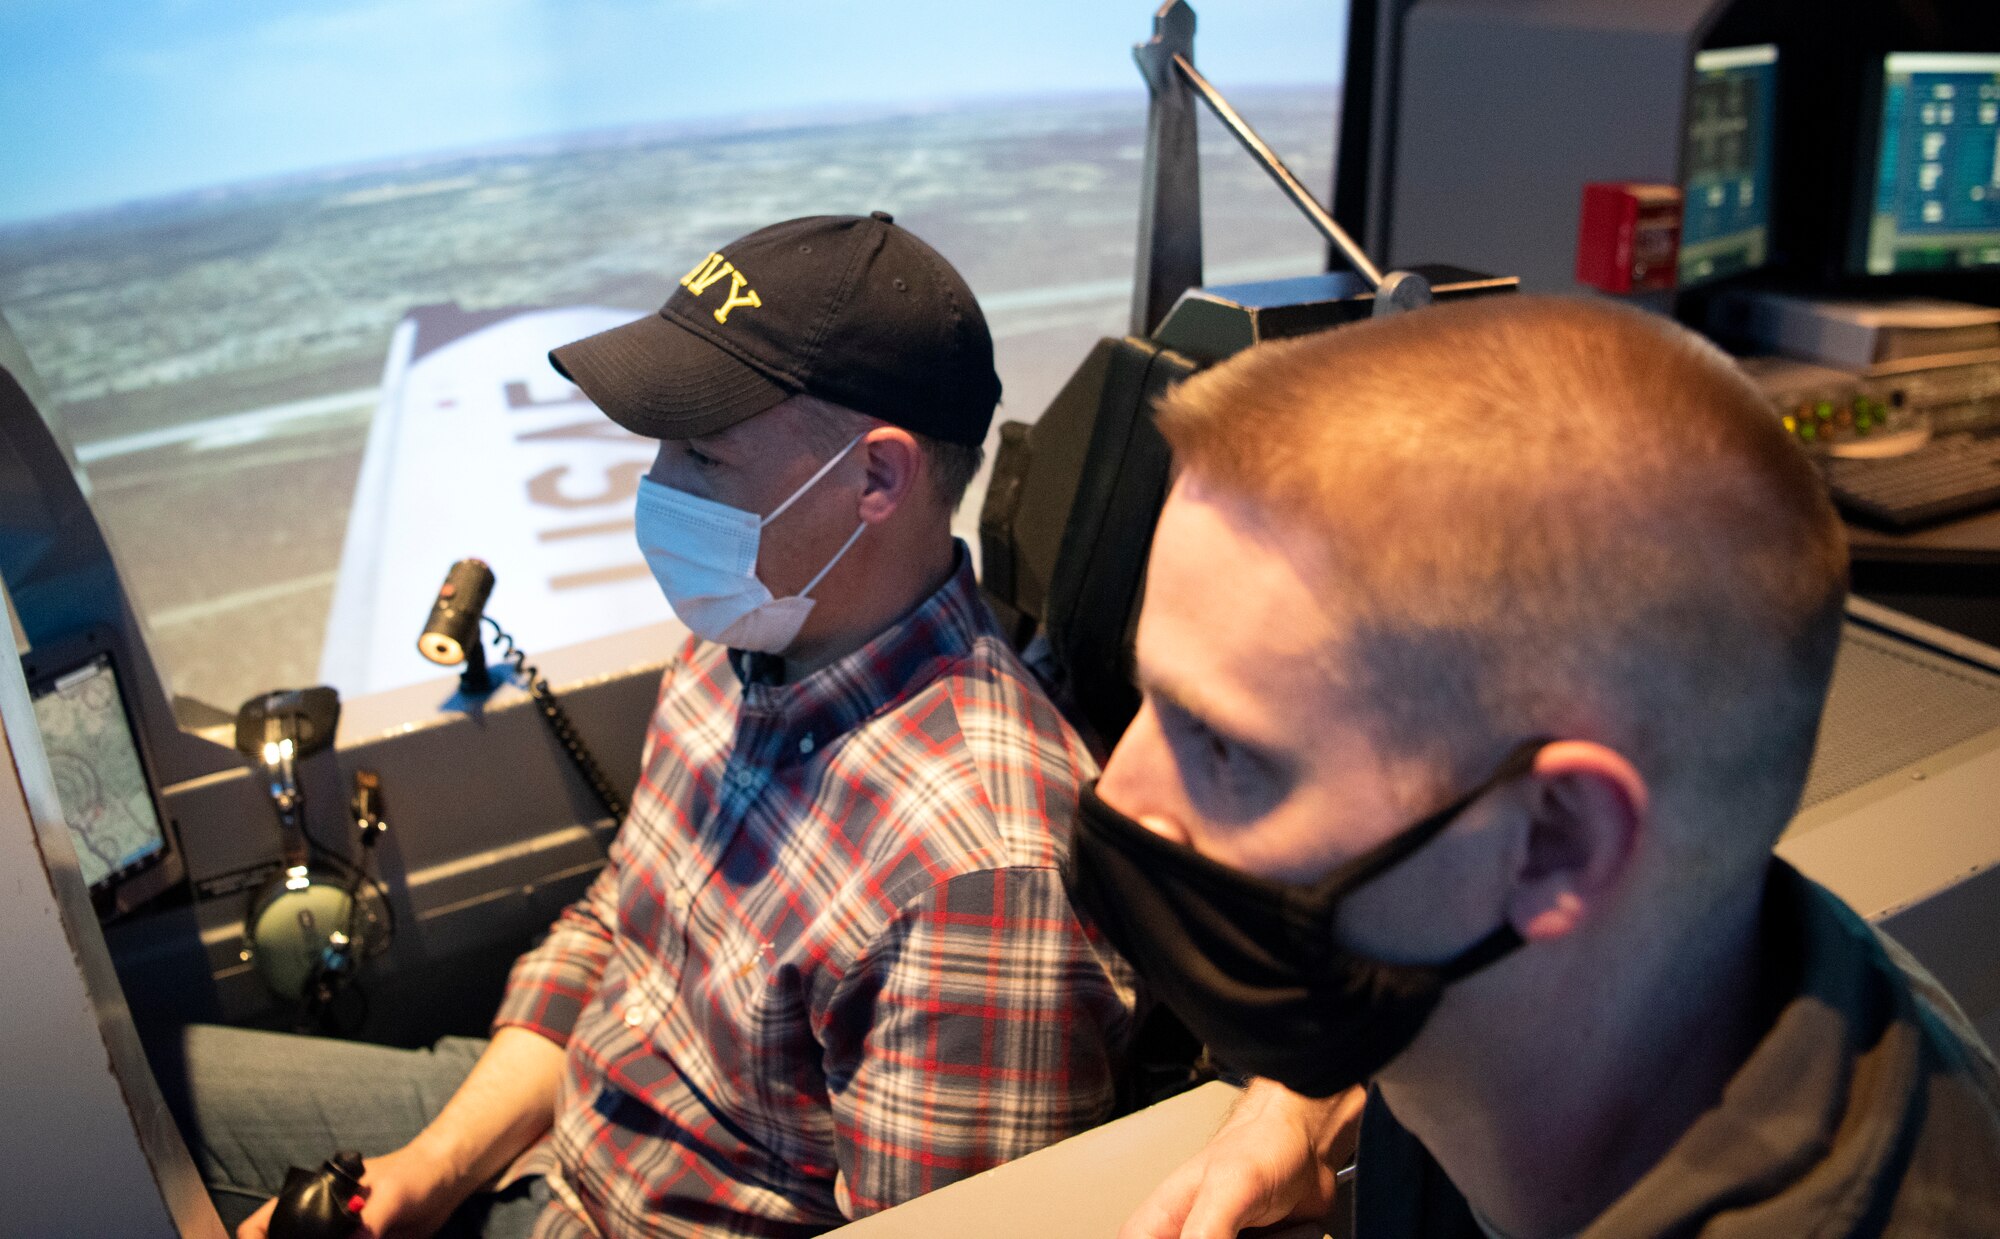 U.S. Rep. Jim Banks and Capt Neal Molzon, 85th Flying Training squadon instructor iilot, pilot a T-6 Simulator, on April 8, 2021 at Laughlin Air Force Base, Texas.   The representives  learned how Laughlin trainees gained experience by learning how to fly simulators. (U.S. Air Force photo by Senior Airman Nicholas Larsen)